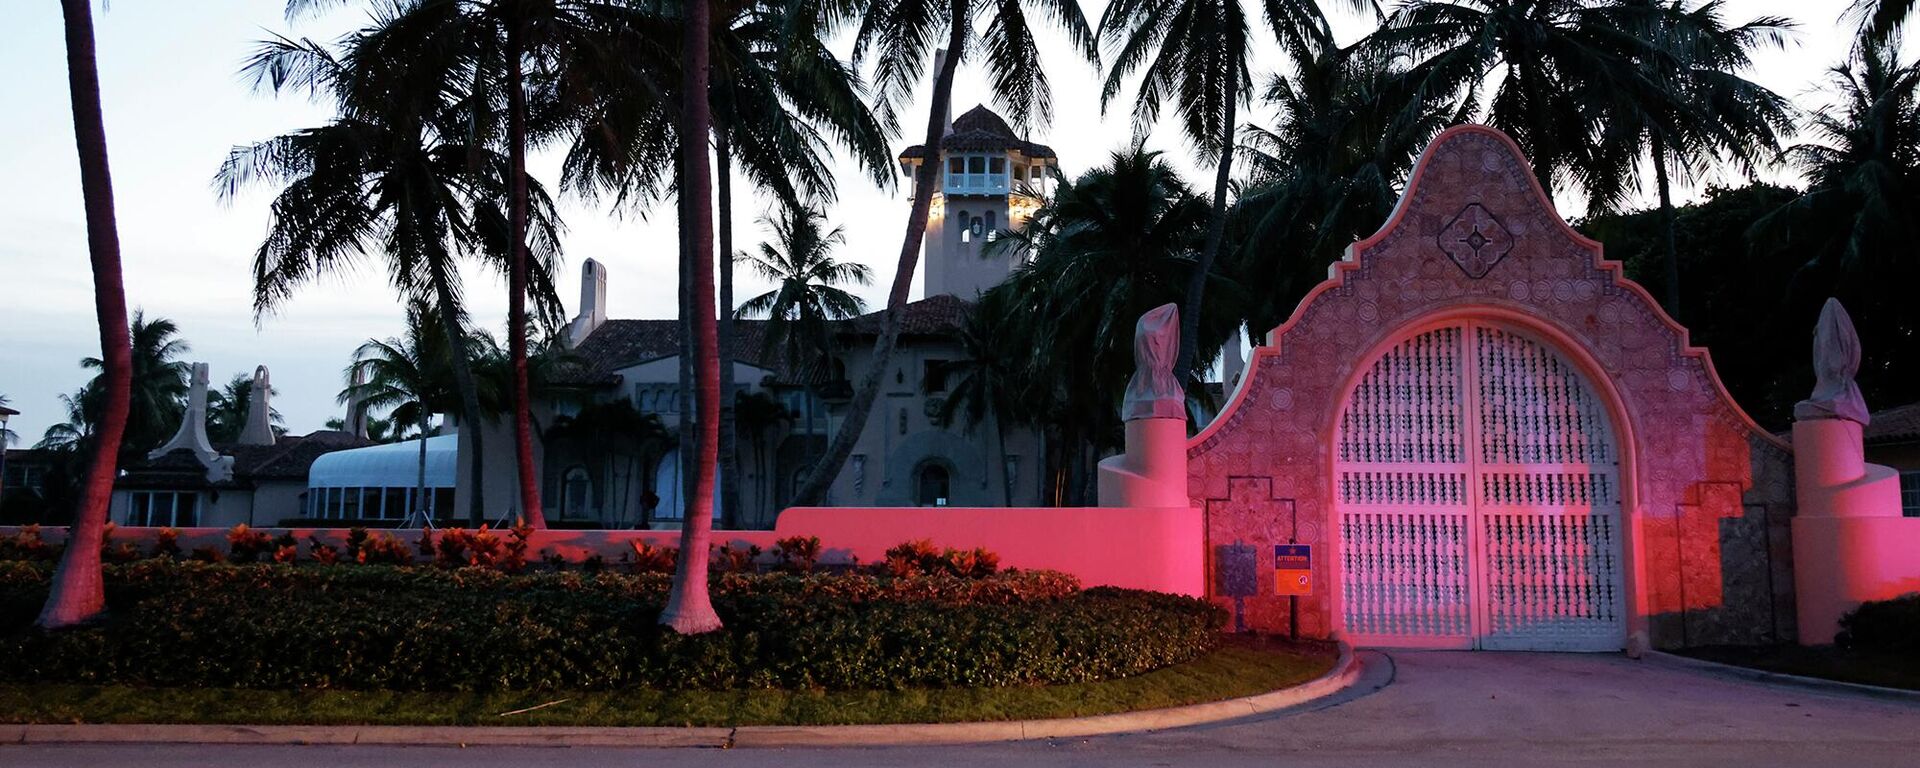 The entrance to former President Donald Trump's Mar-a-Lago estate is shown, Monday, Aug. 8, 2022, in Palm Beach, Fla. - Sputnik International, 1920, 09.08.2022